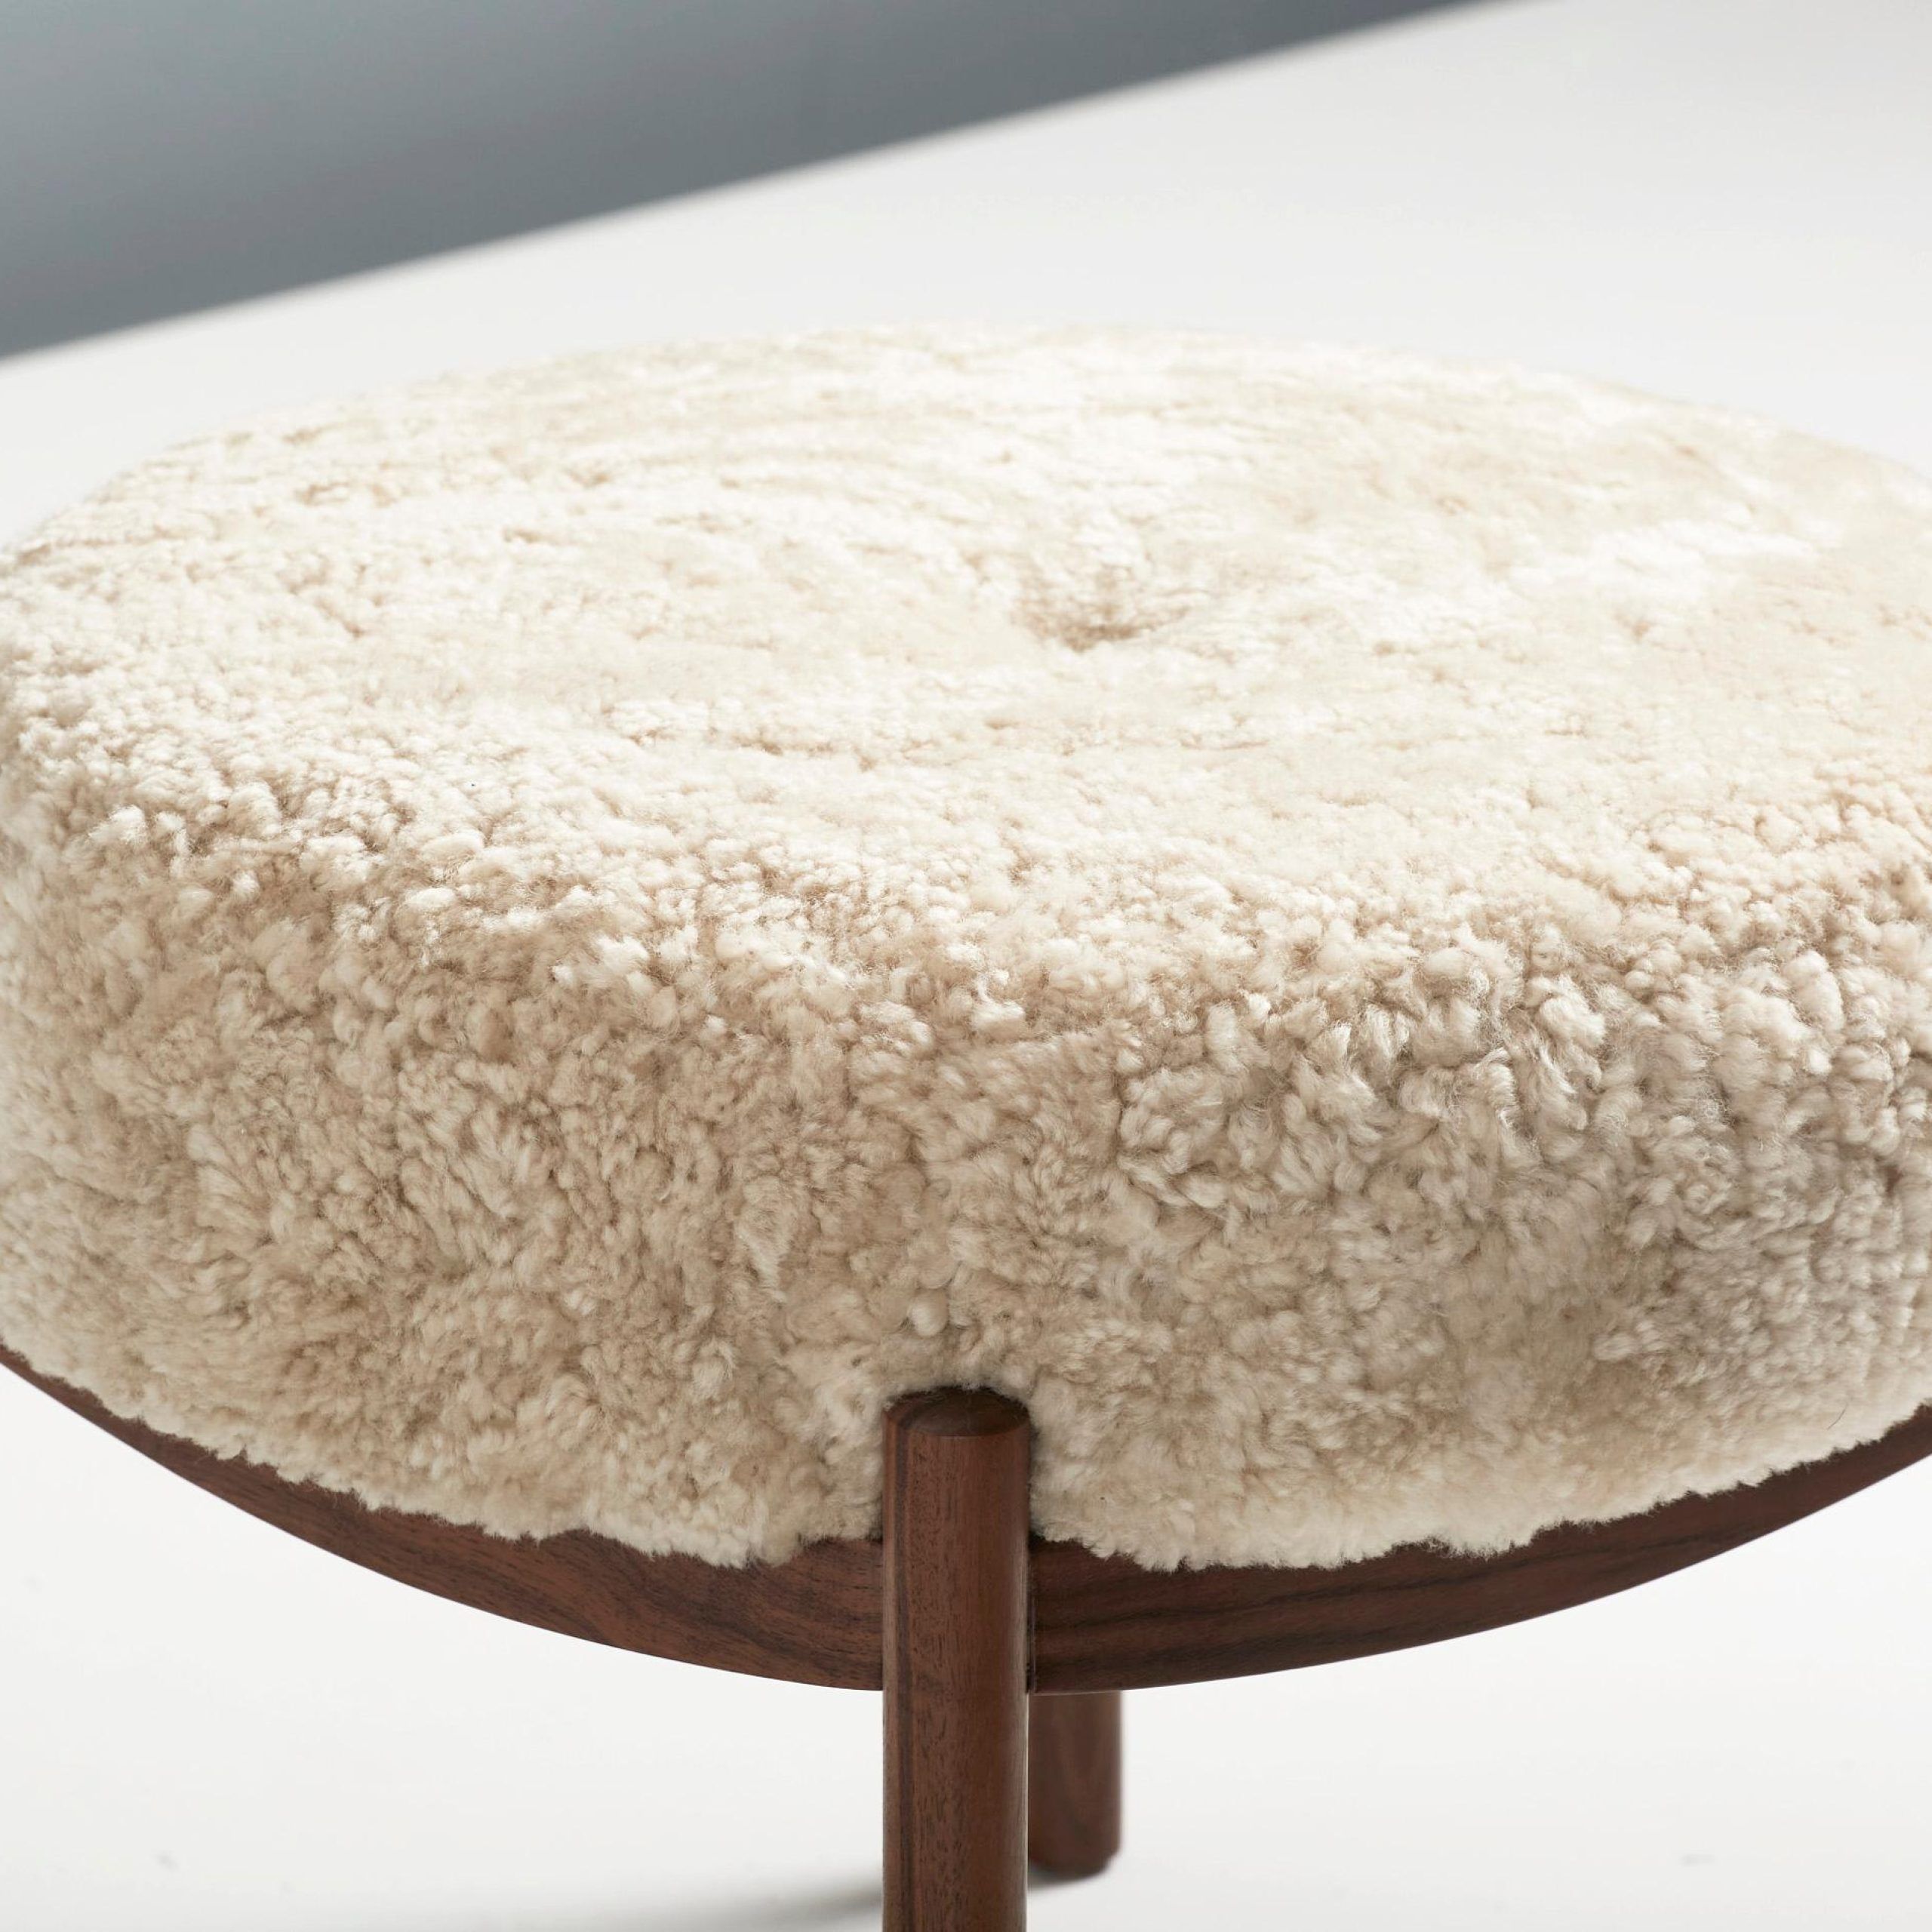 Custom Made Walnut And Shearling Round Ottoman For Sale At 1stdibs Regarding Satin Black Shearling Ottomans (View 4 of 15)